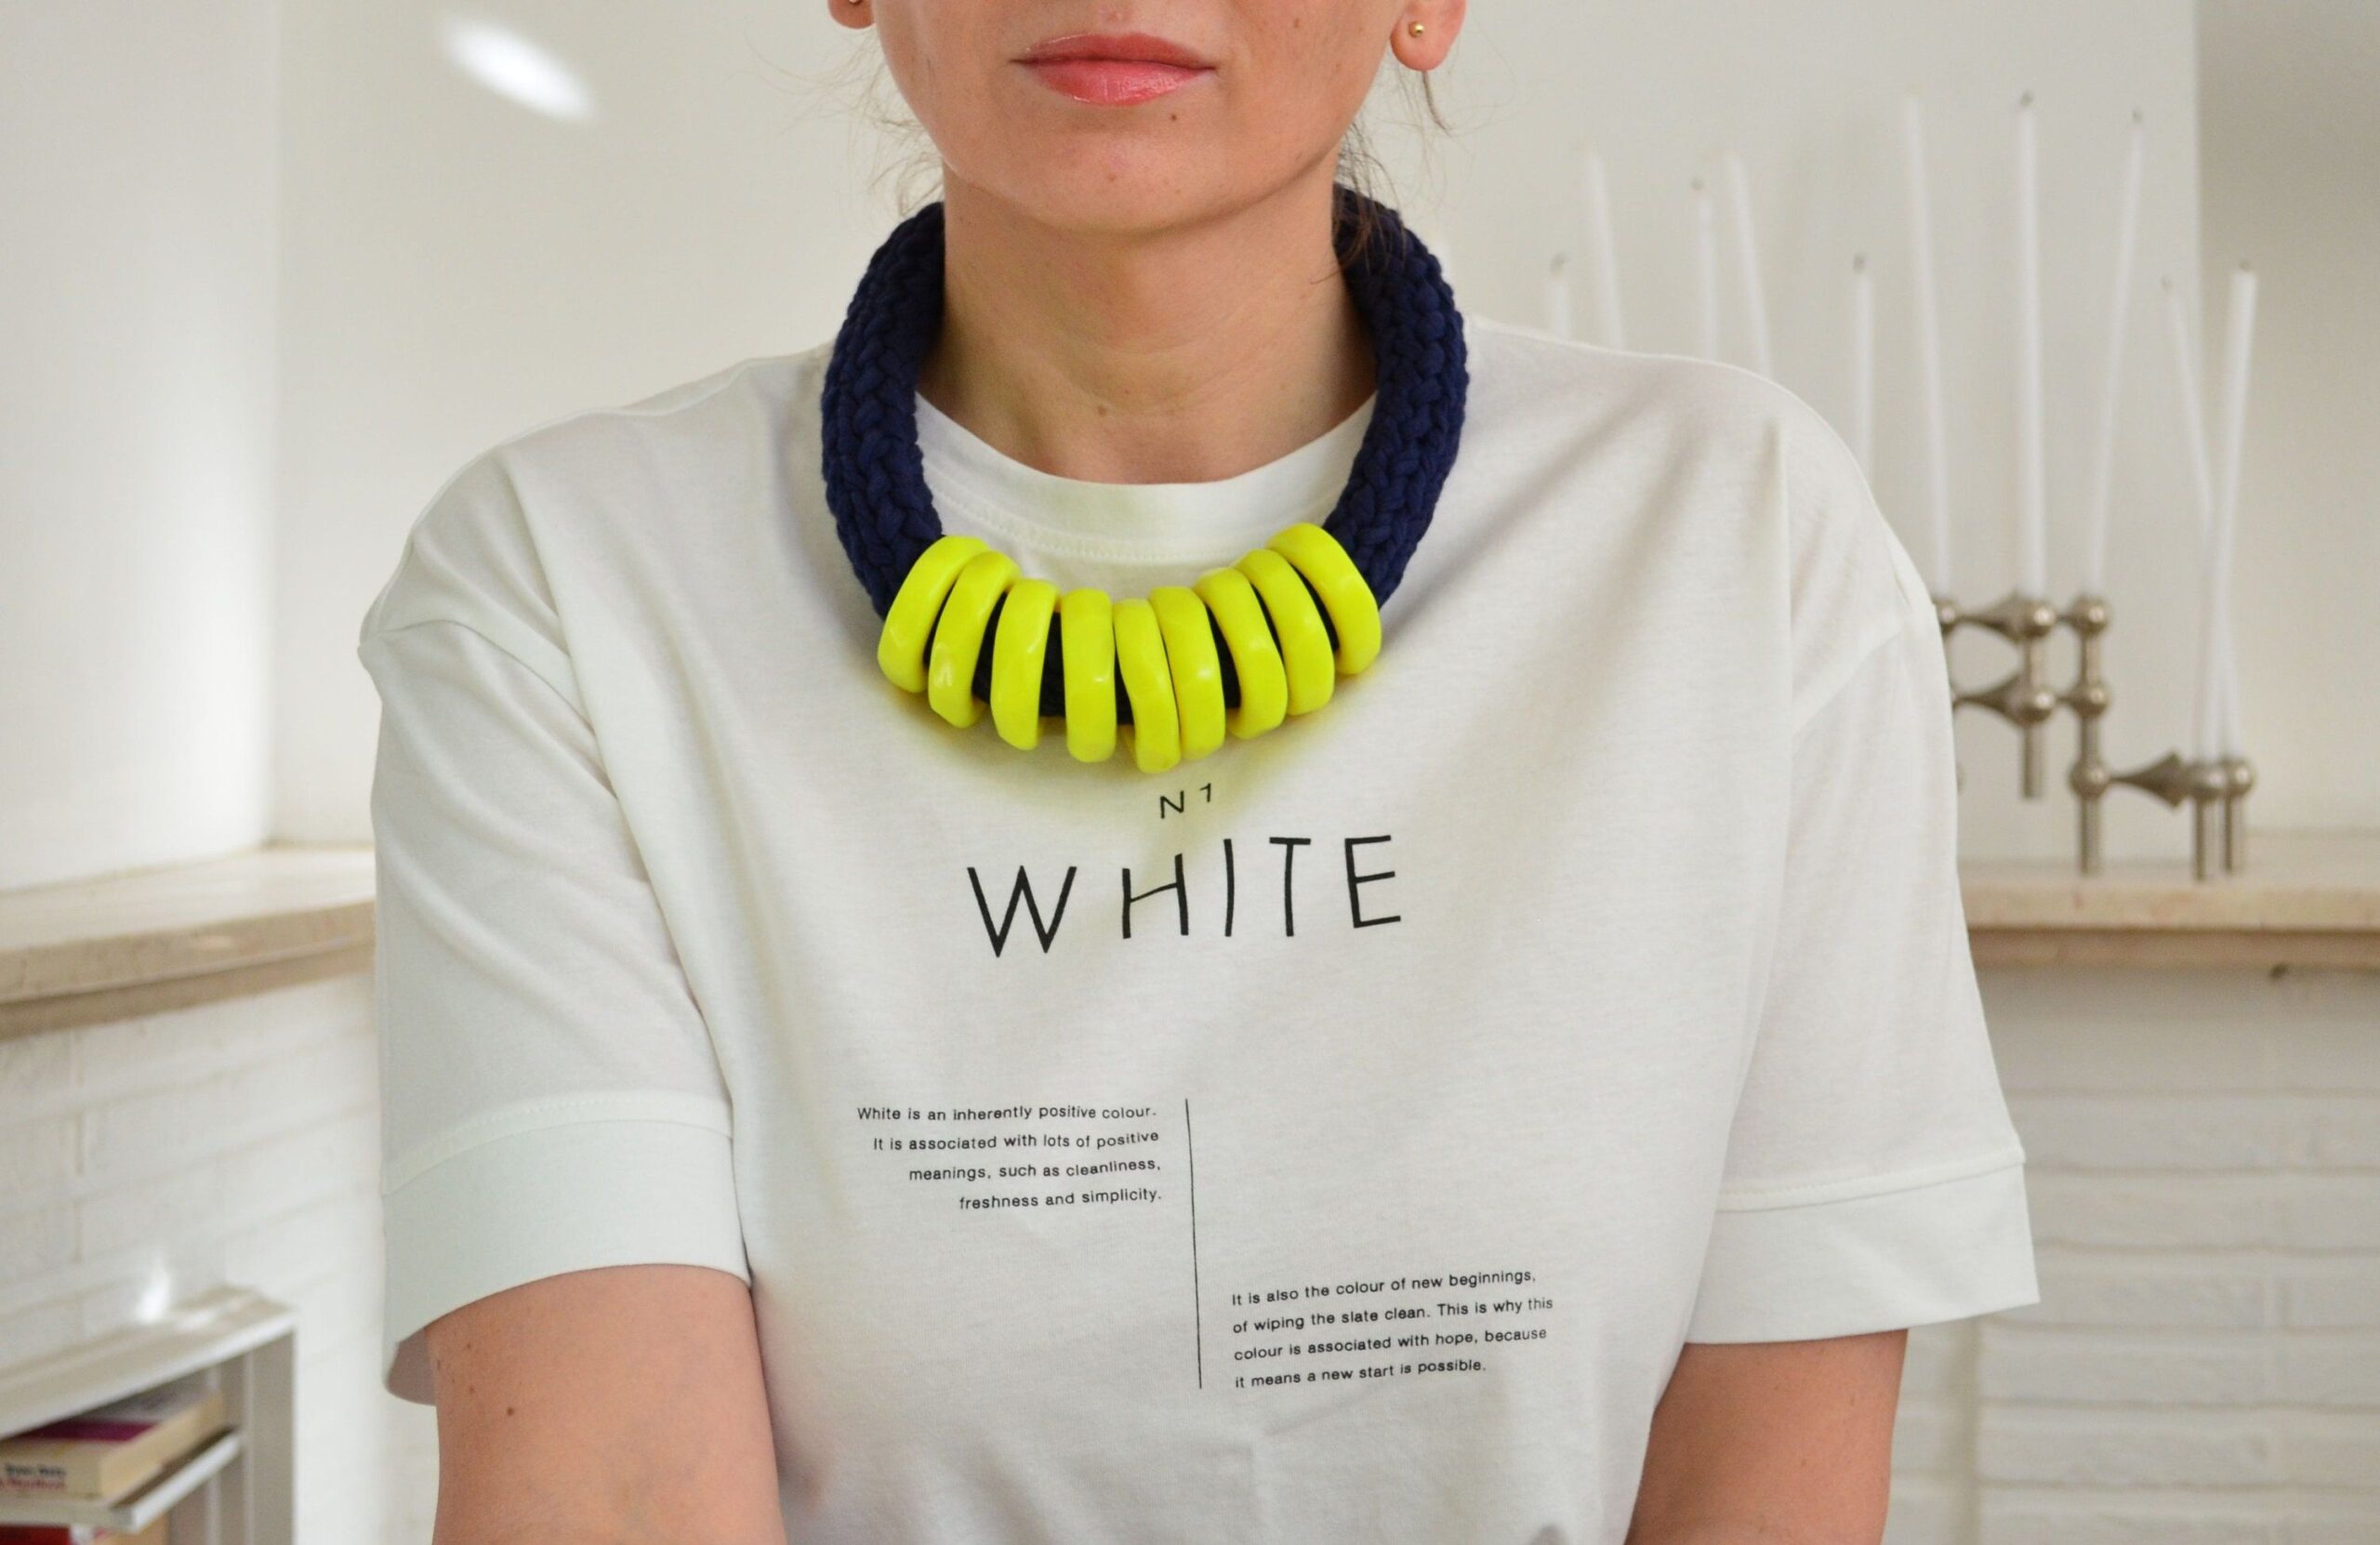 Vibrant Neon Collar Necklace Makes a Statement